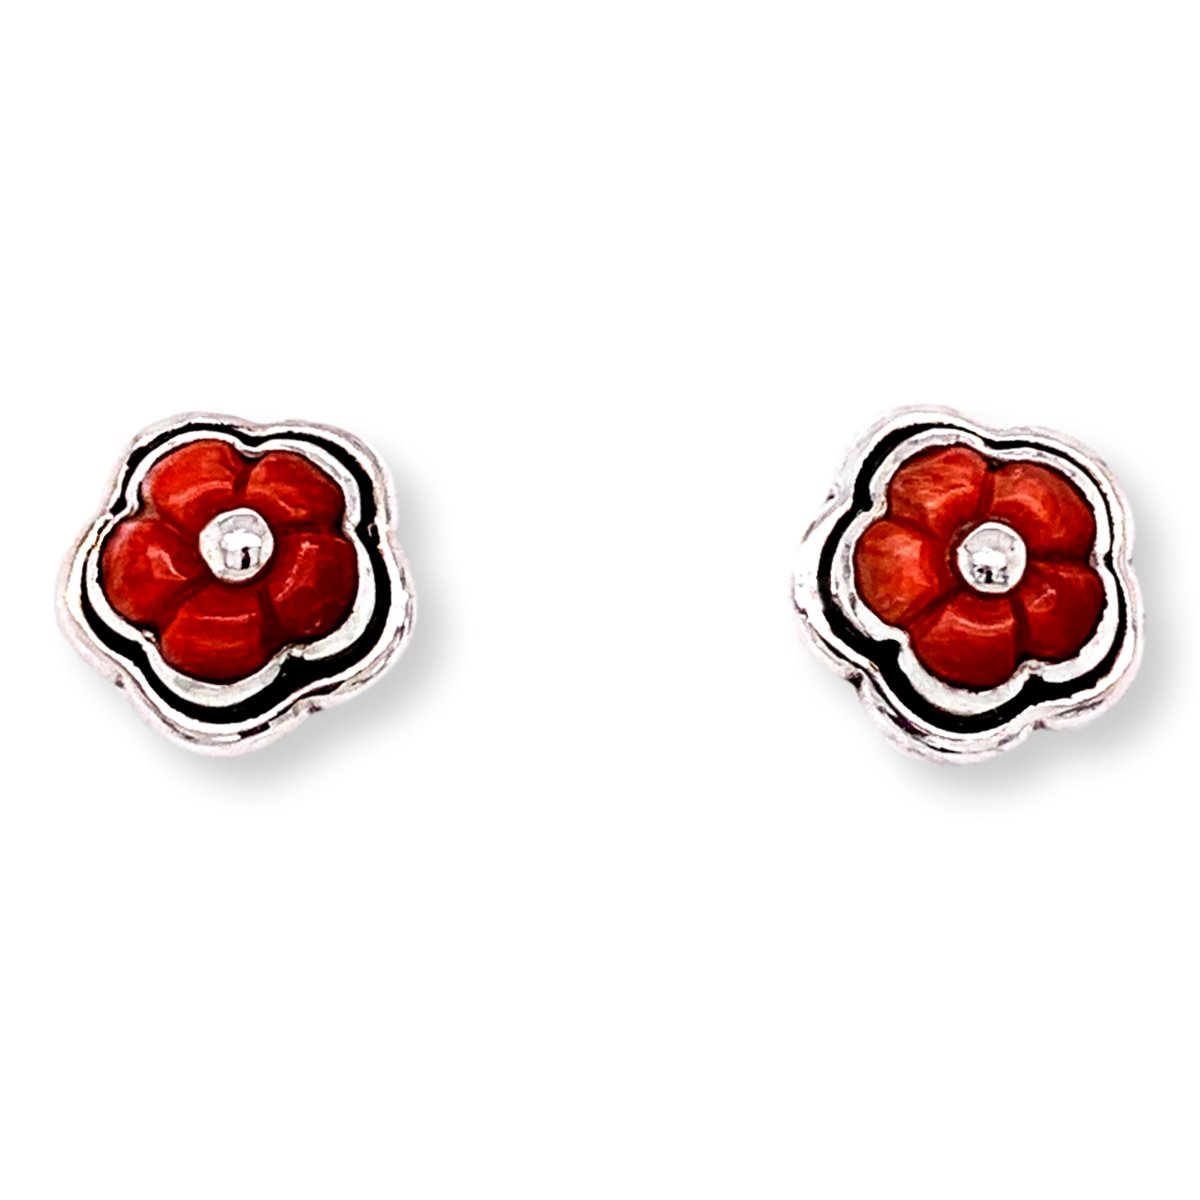 Spiny Oyster Flower Earrings in Sterling Silver - Red - Qinti - The Peruvian Shop